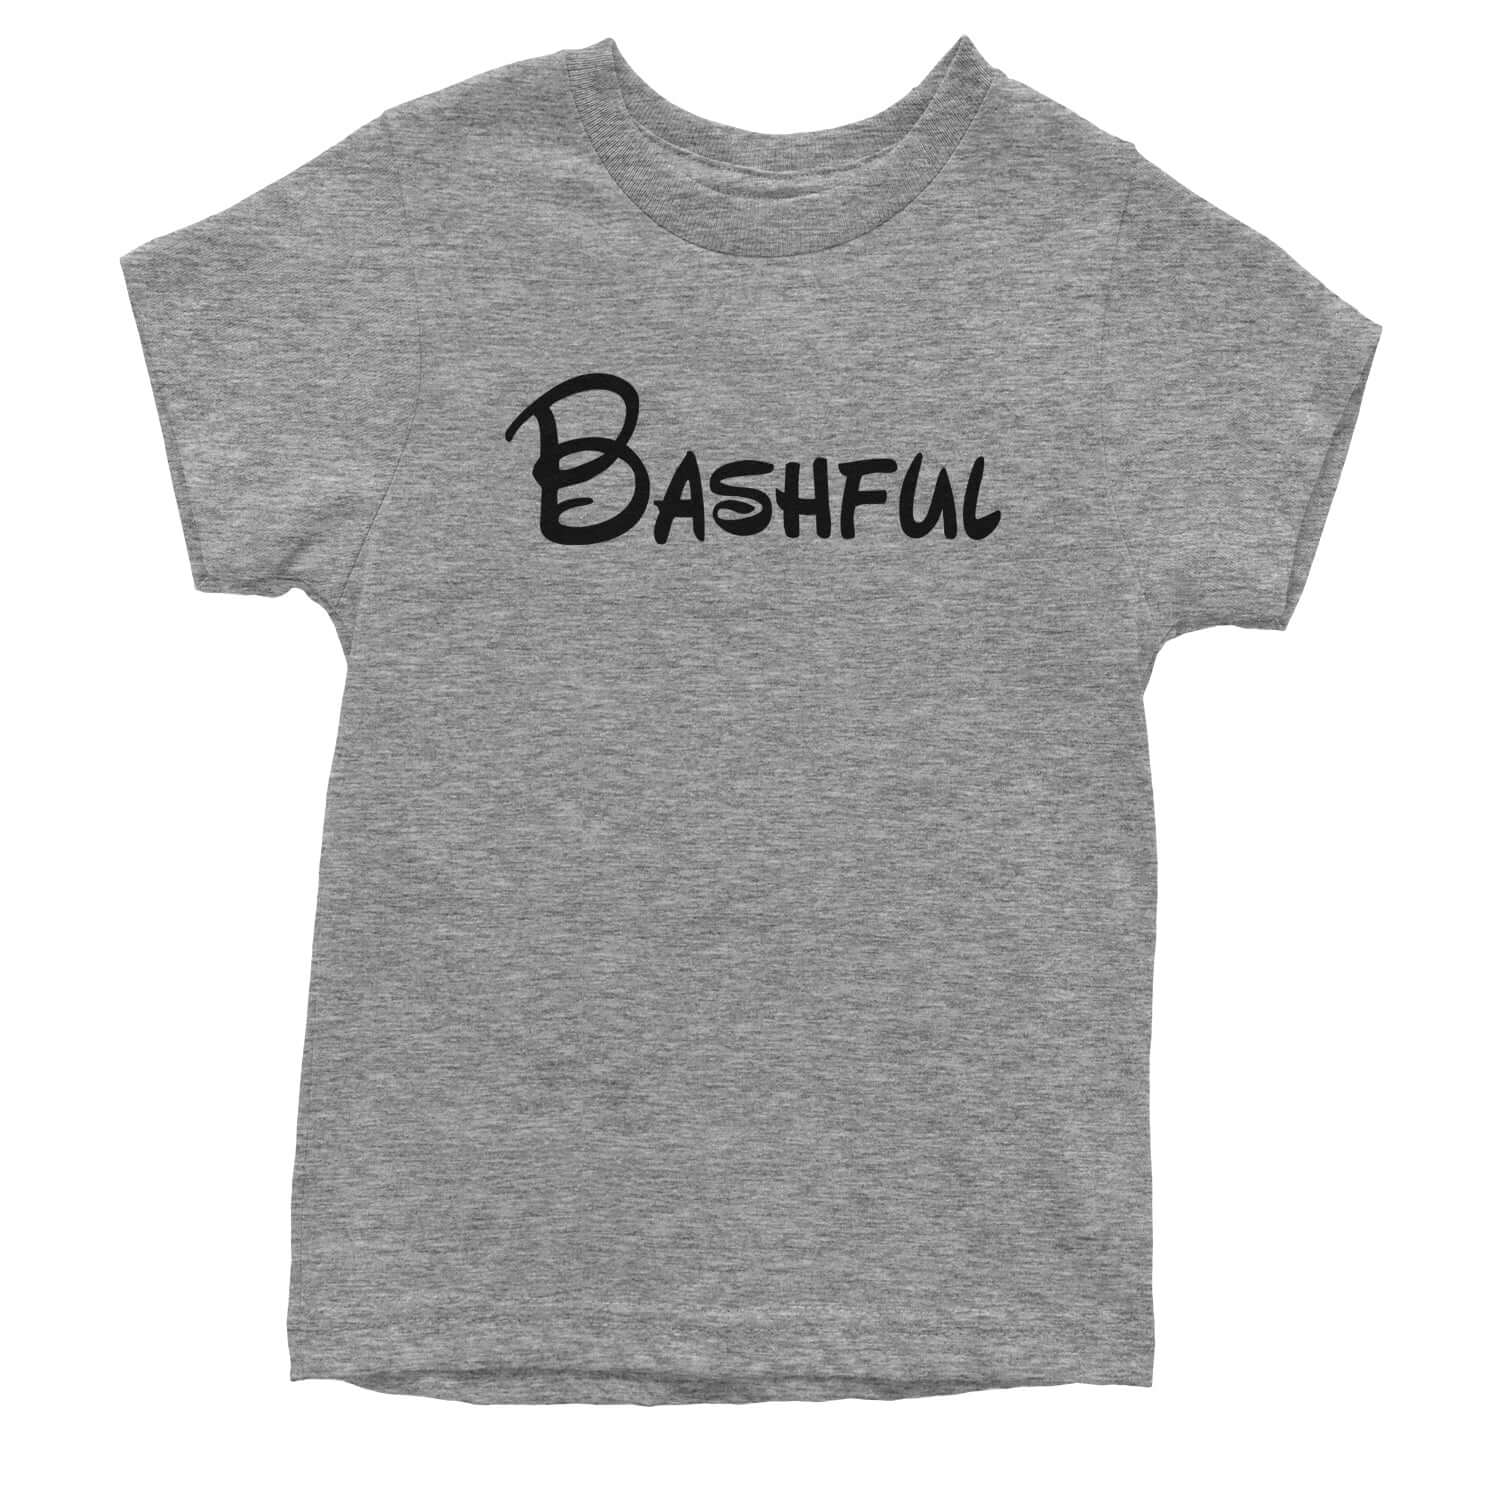 Bashful - 7 Dwarfs Costume Youth T-shirt and, costume, dwarfs, group, halloween, matching, seven, snow, the, white by Expression Tees